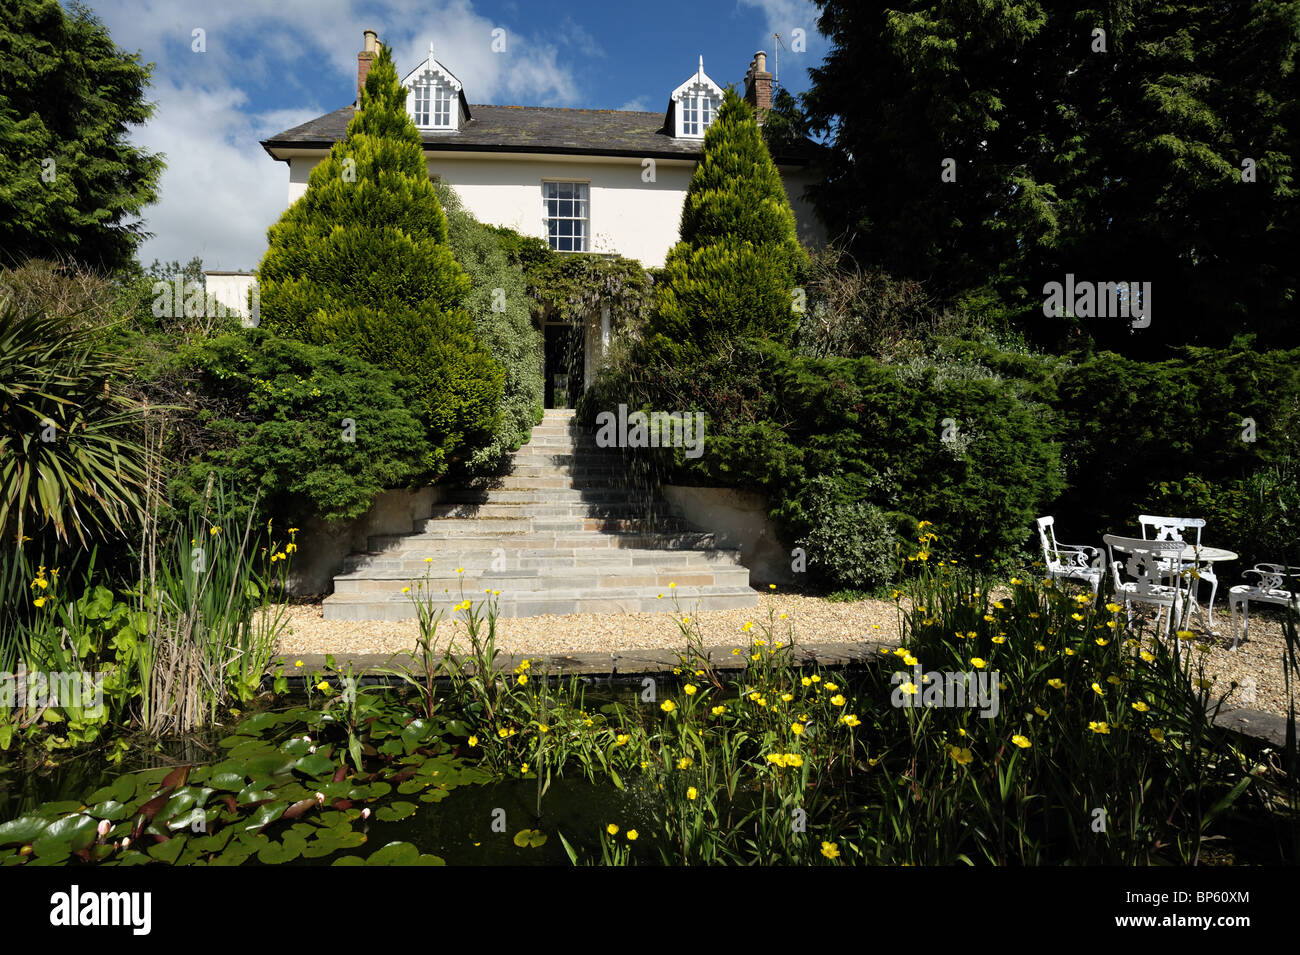 Mature garden with stone steps leading to a Georgian house, a pond in the foreground Stock Photo